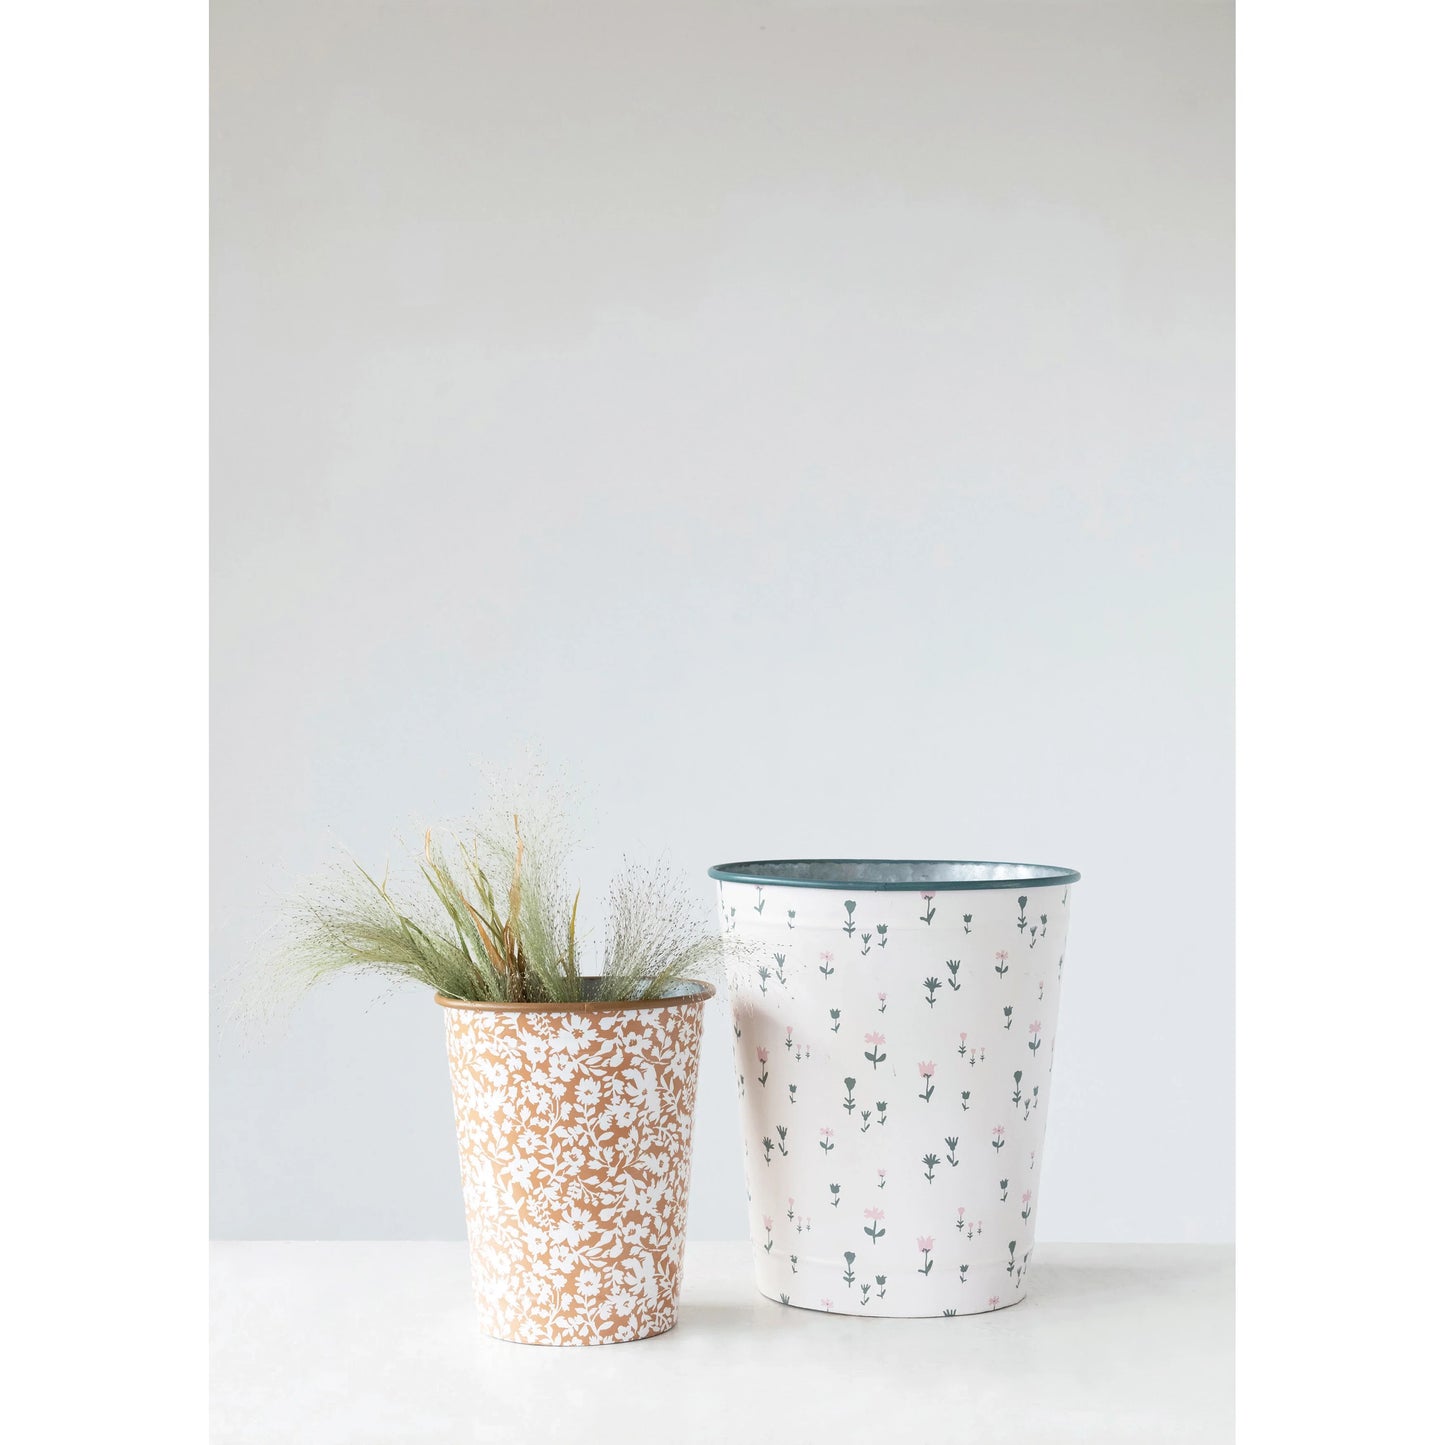 Metal Buckets with Floral Prints